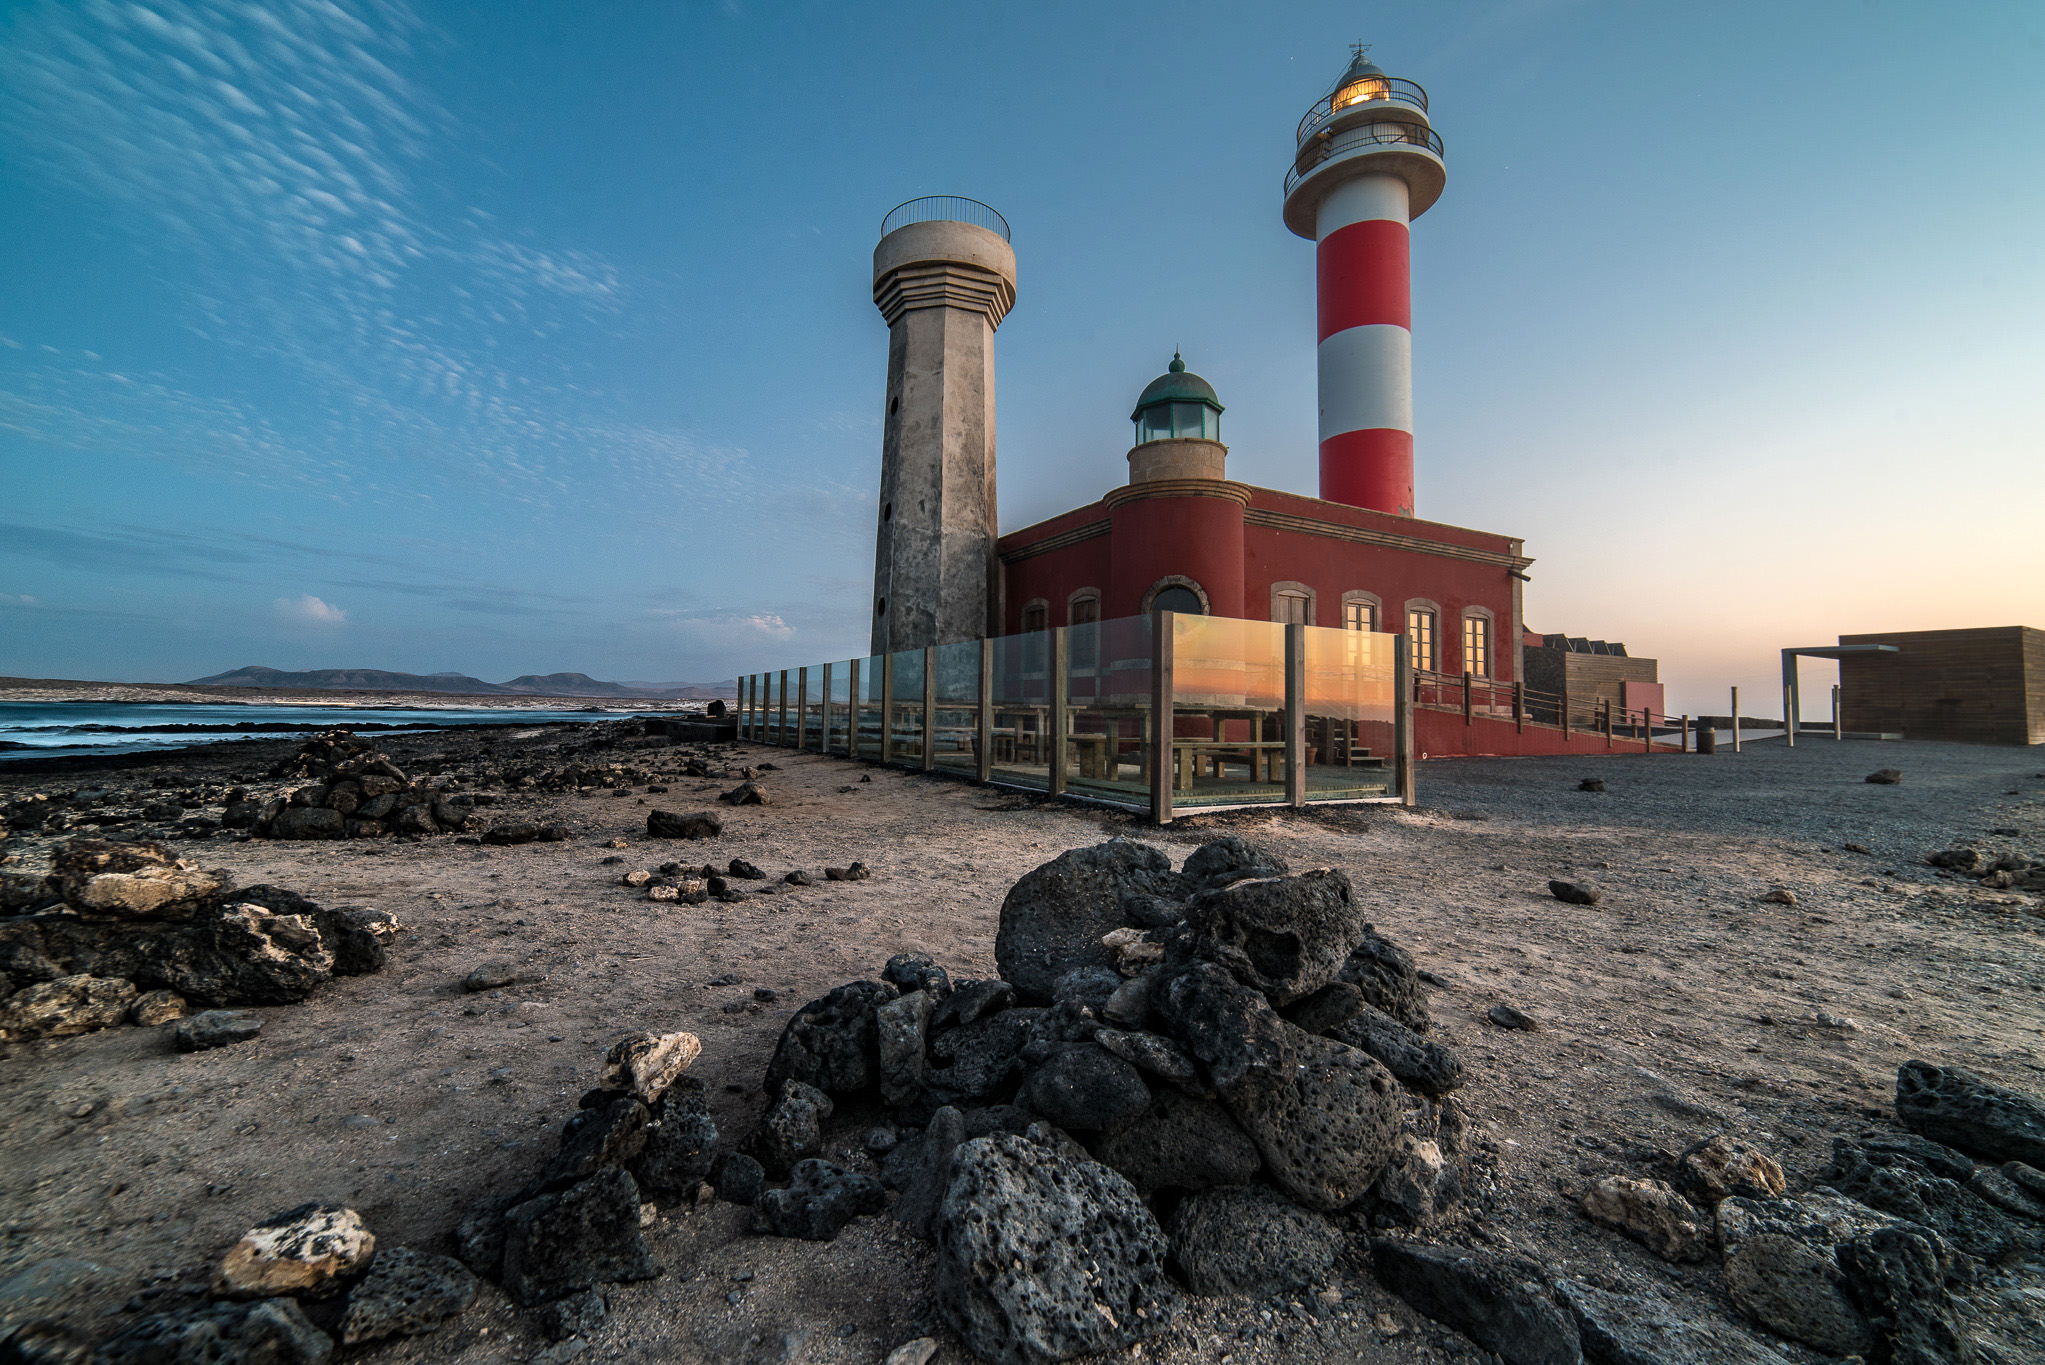 What to Photograph in the Canary Islands - Fuerteventura